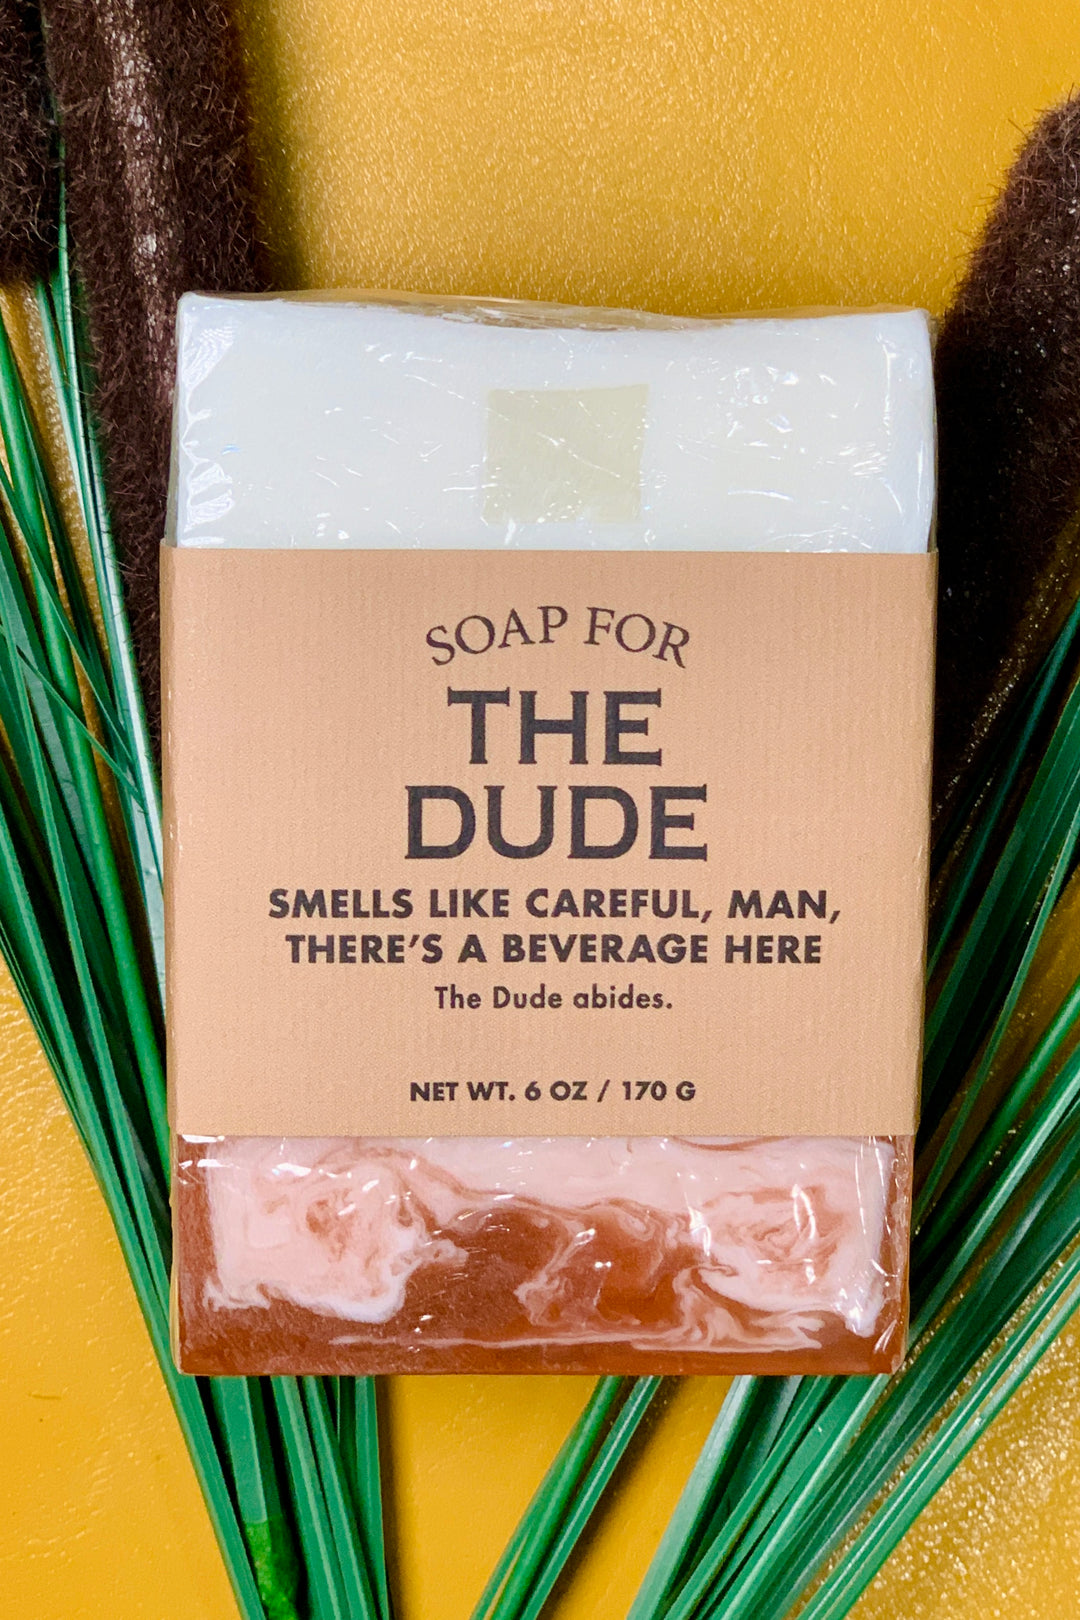 Soap for Neat Freaks ~ Smells Like Clean Counters And Spotless